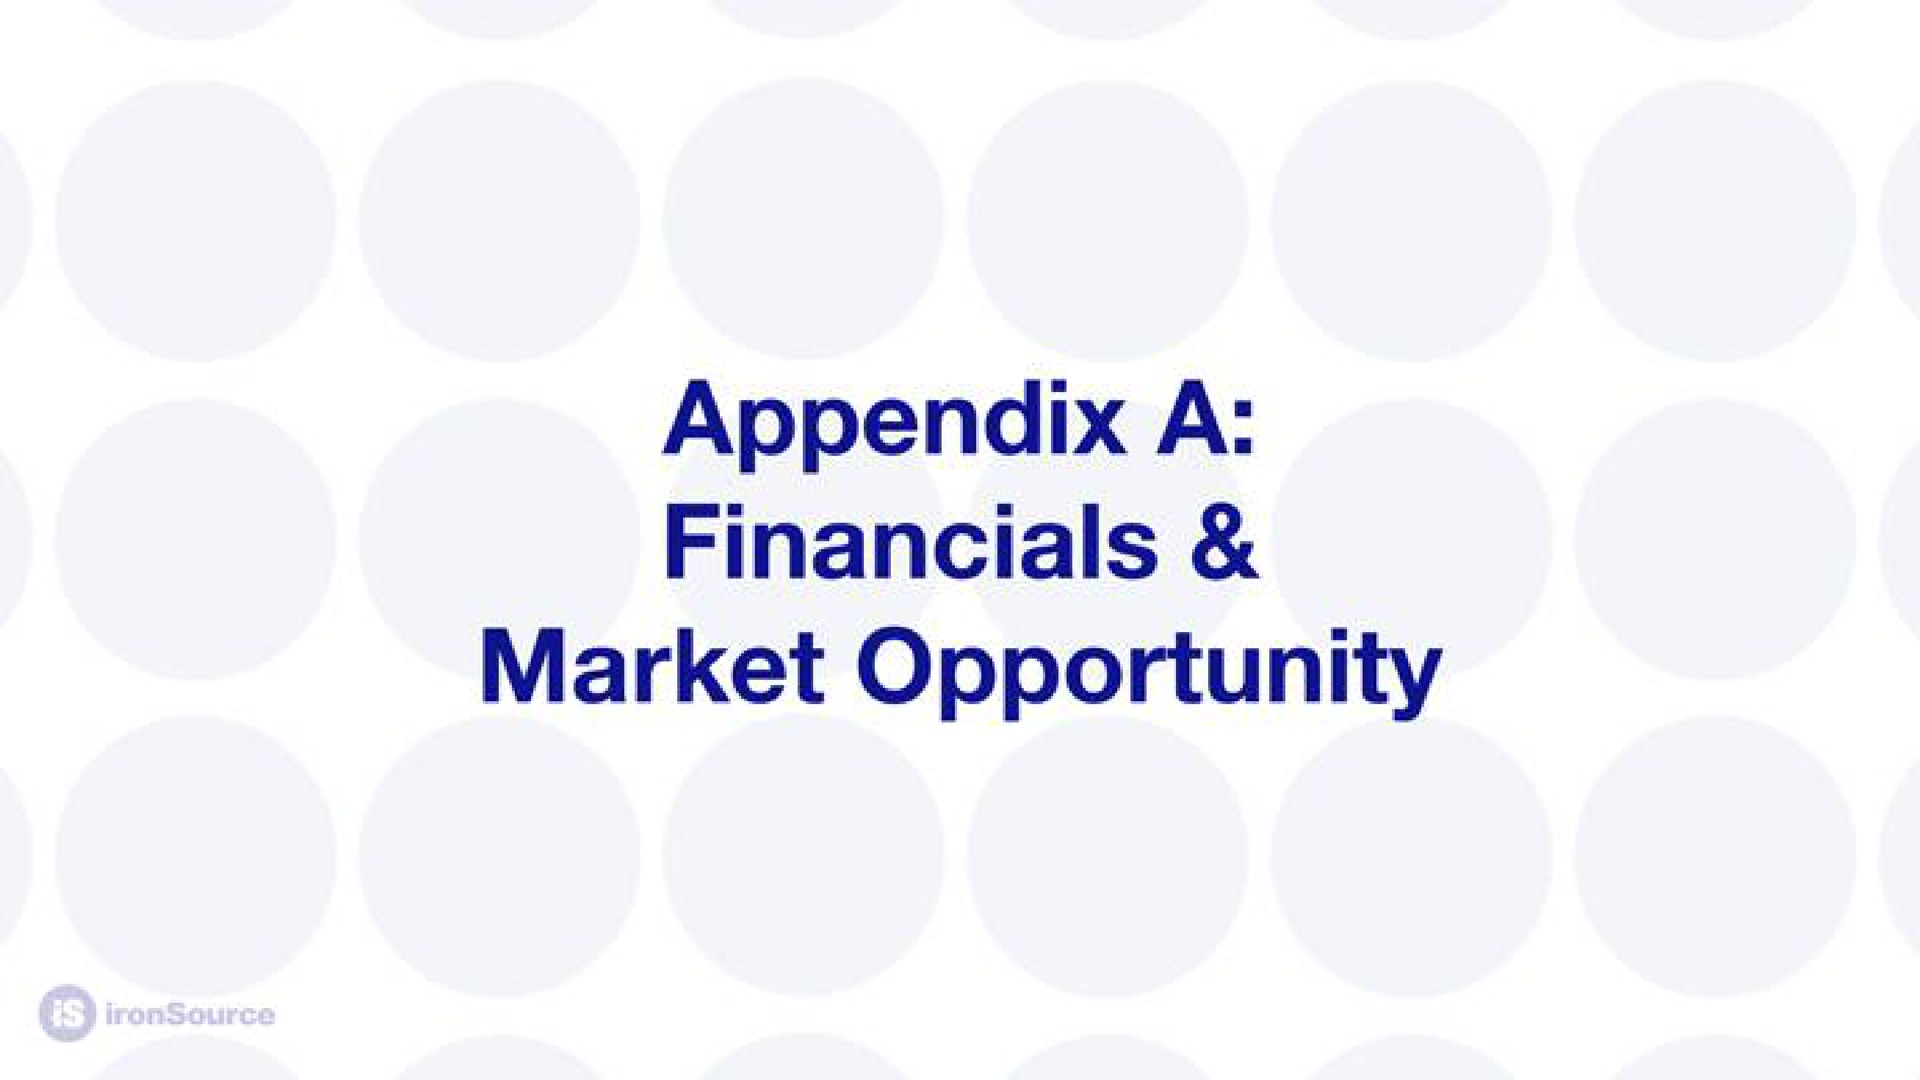 appendix a market opportunity | ironSource